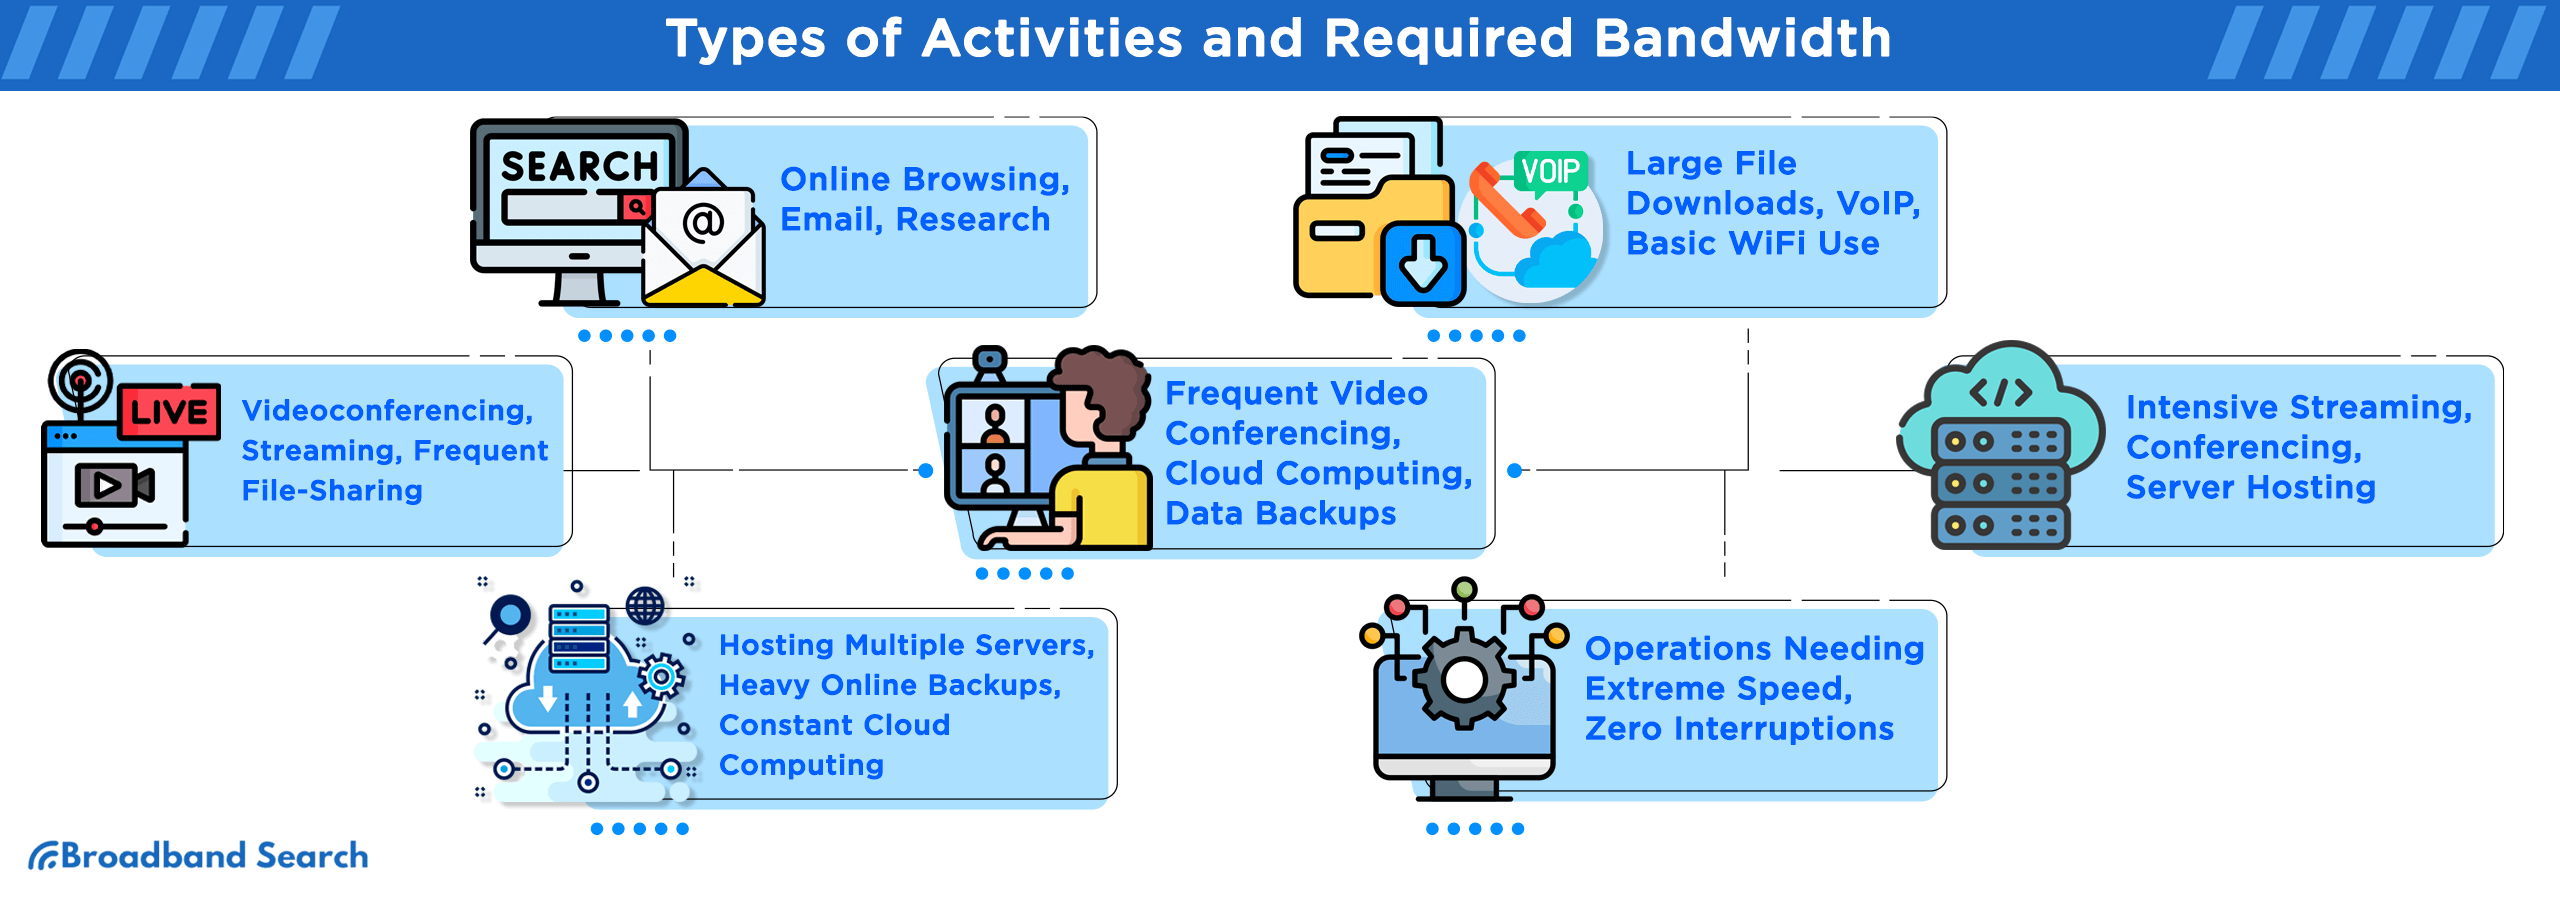 types of activities and their respective required bandwidth